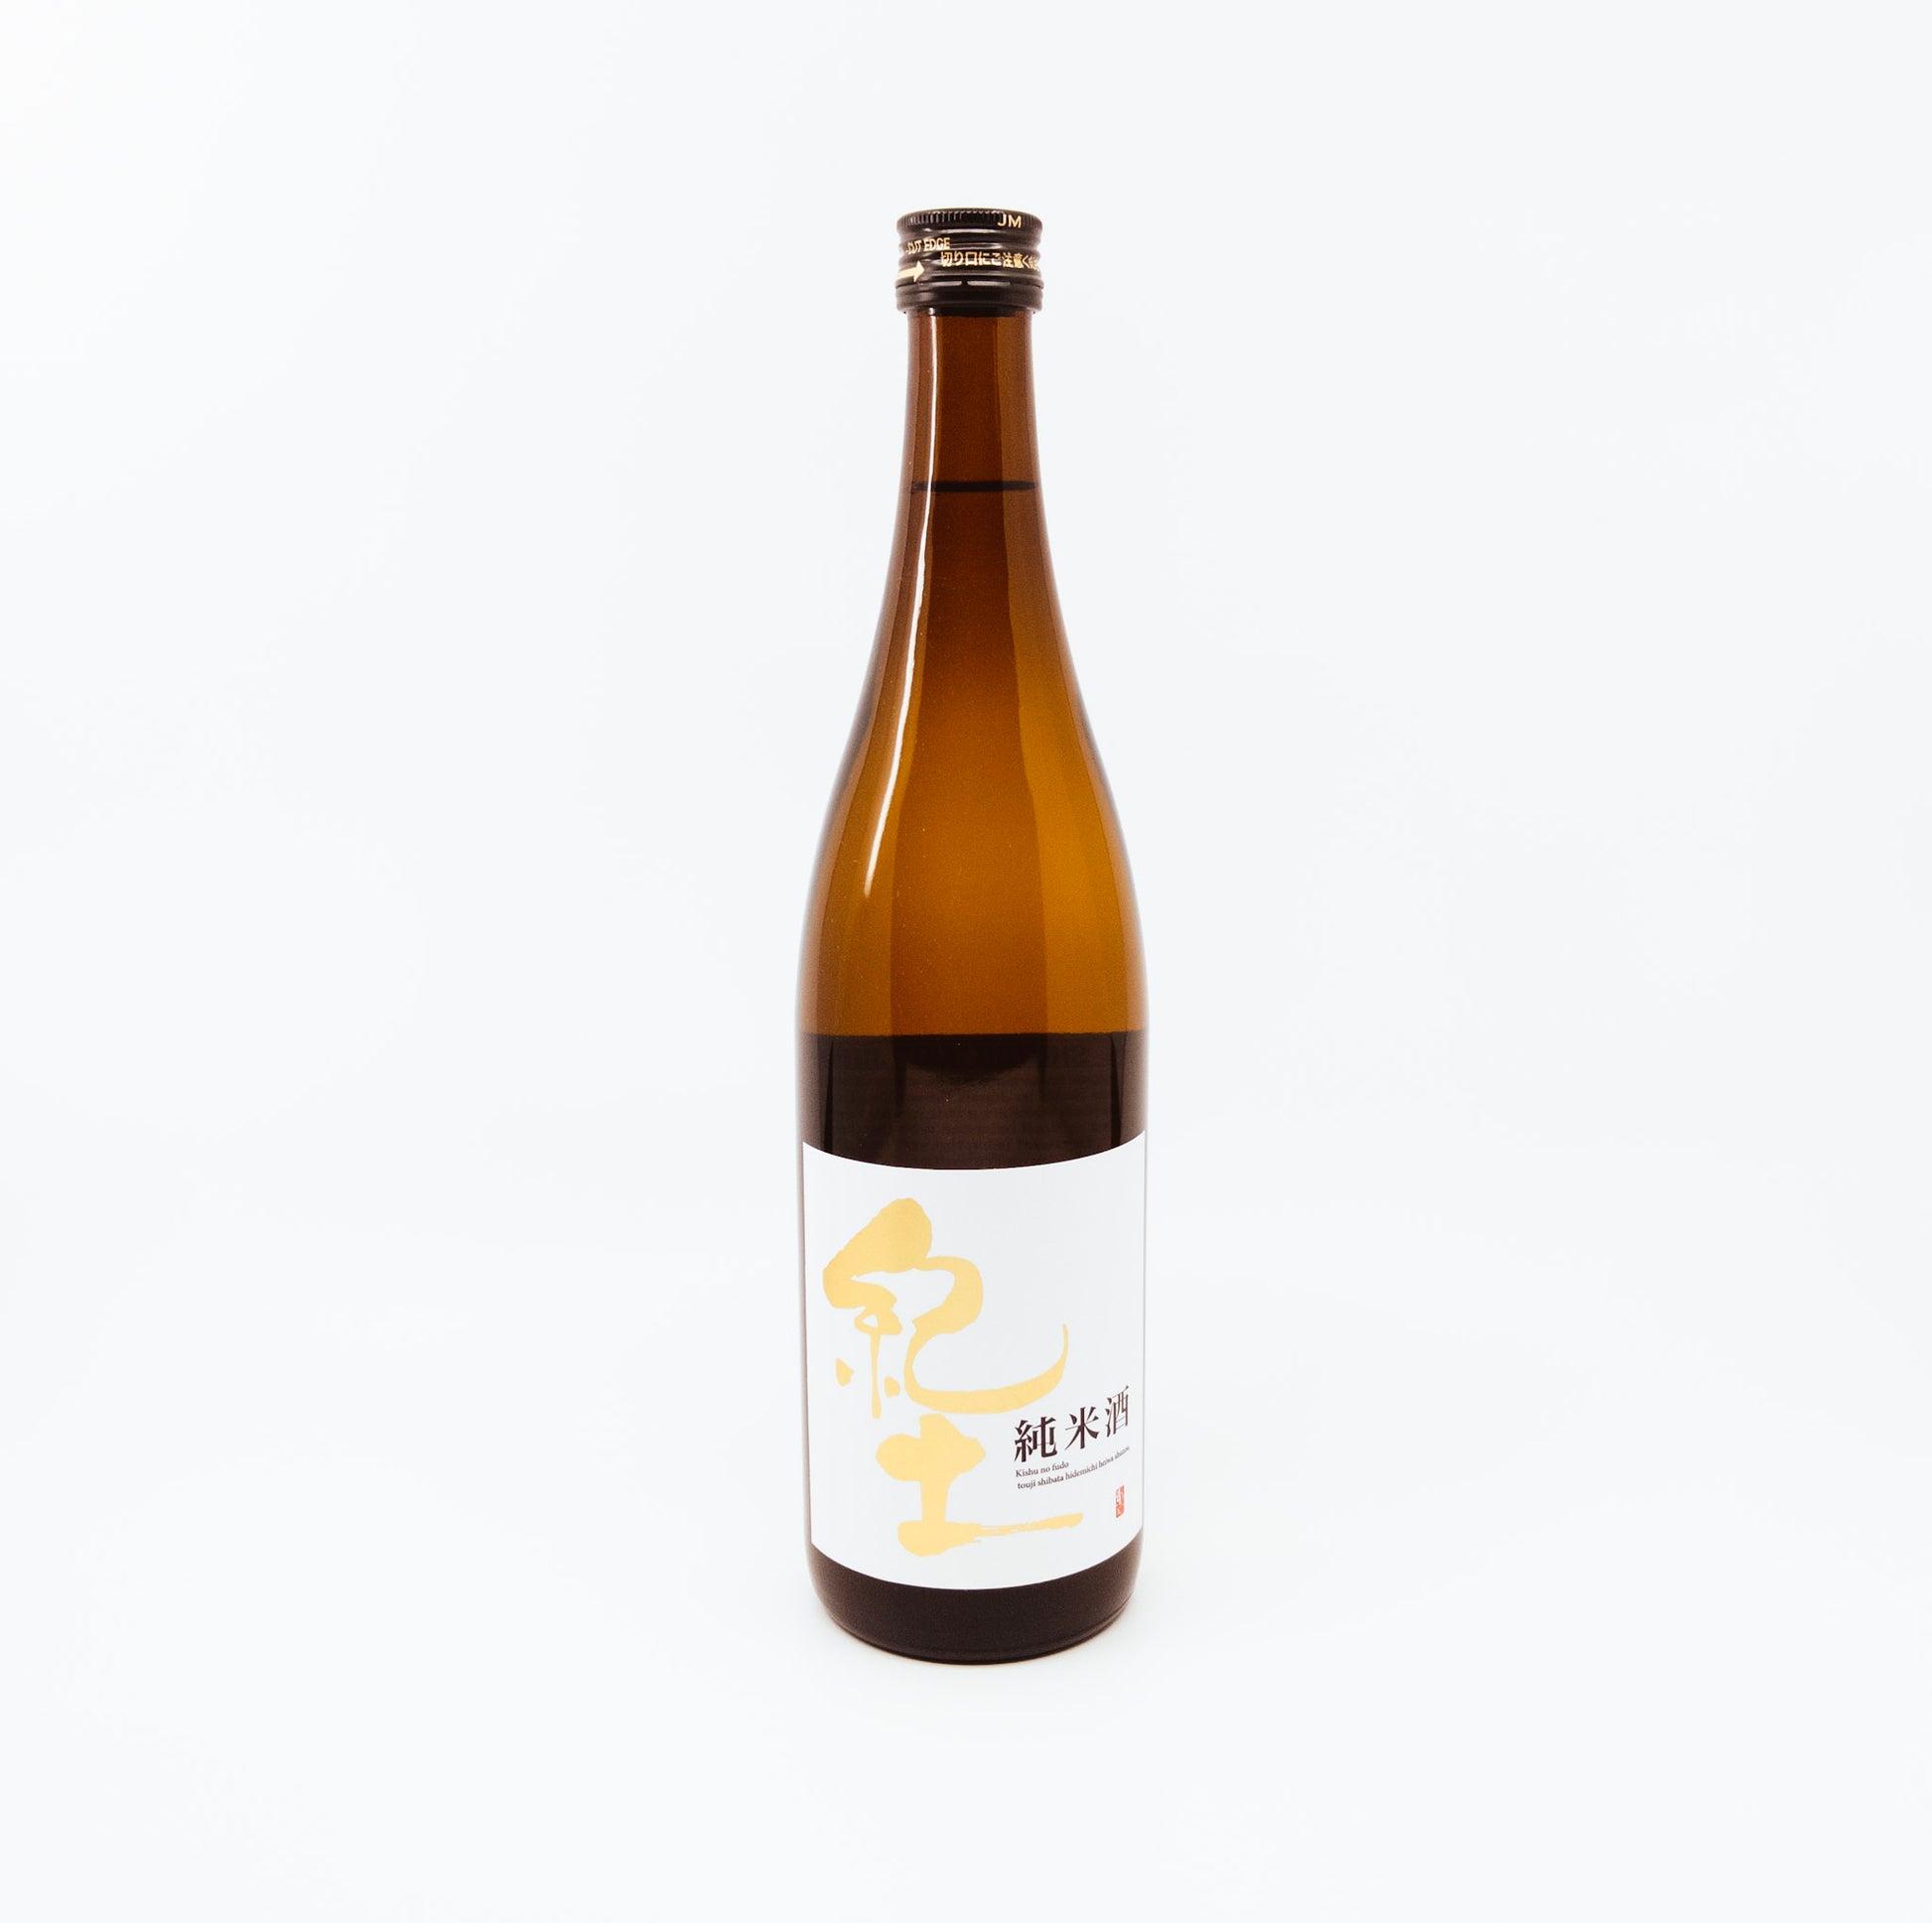 brown bottle with yellow writing on white label